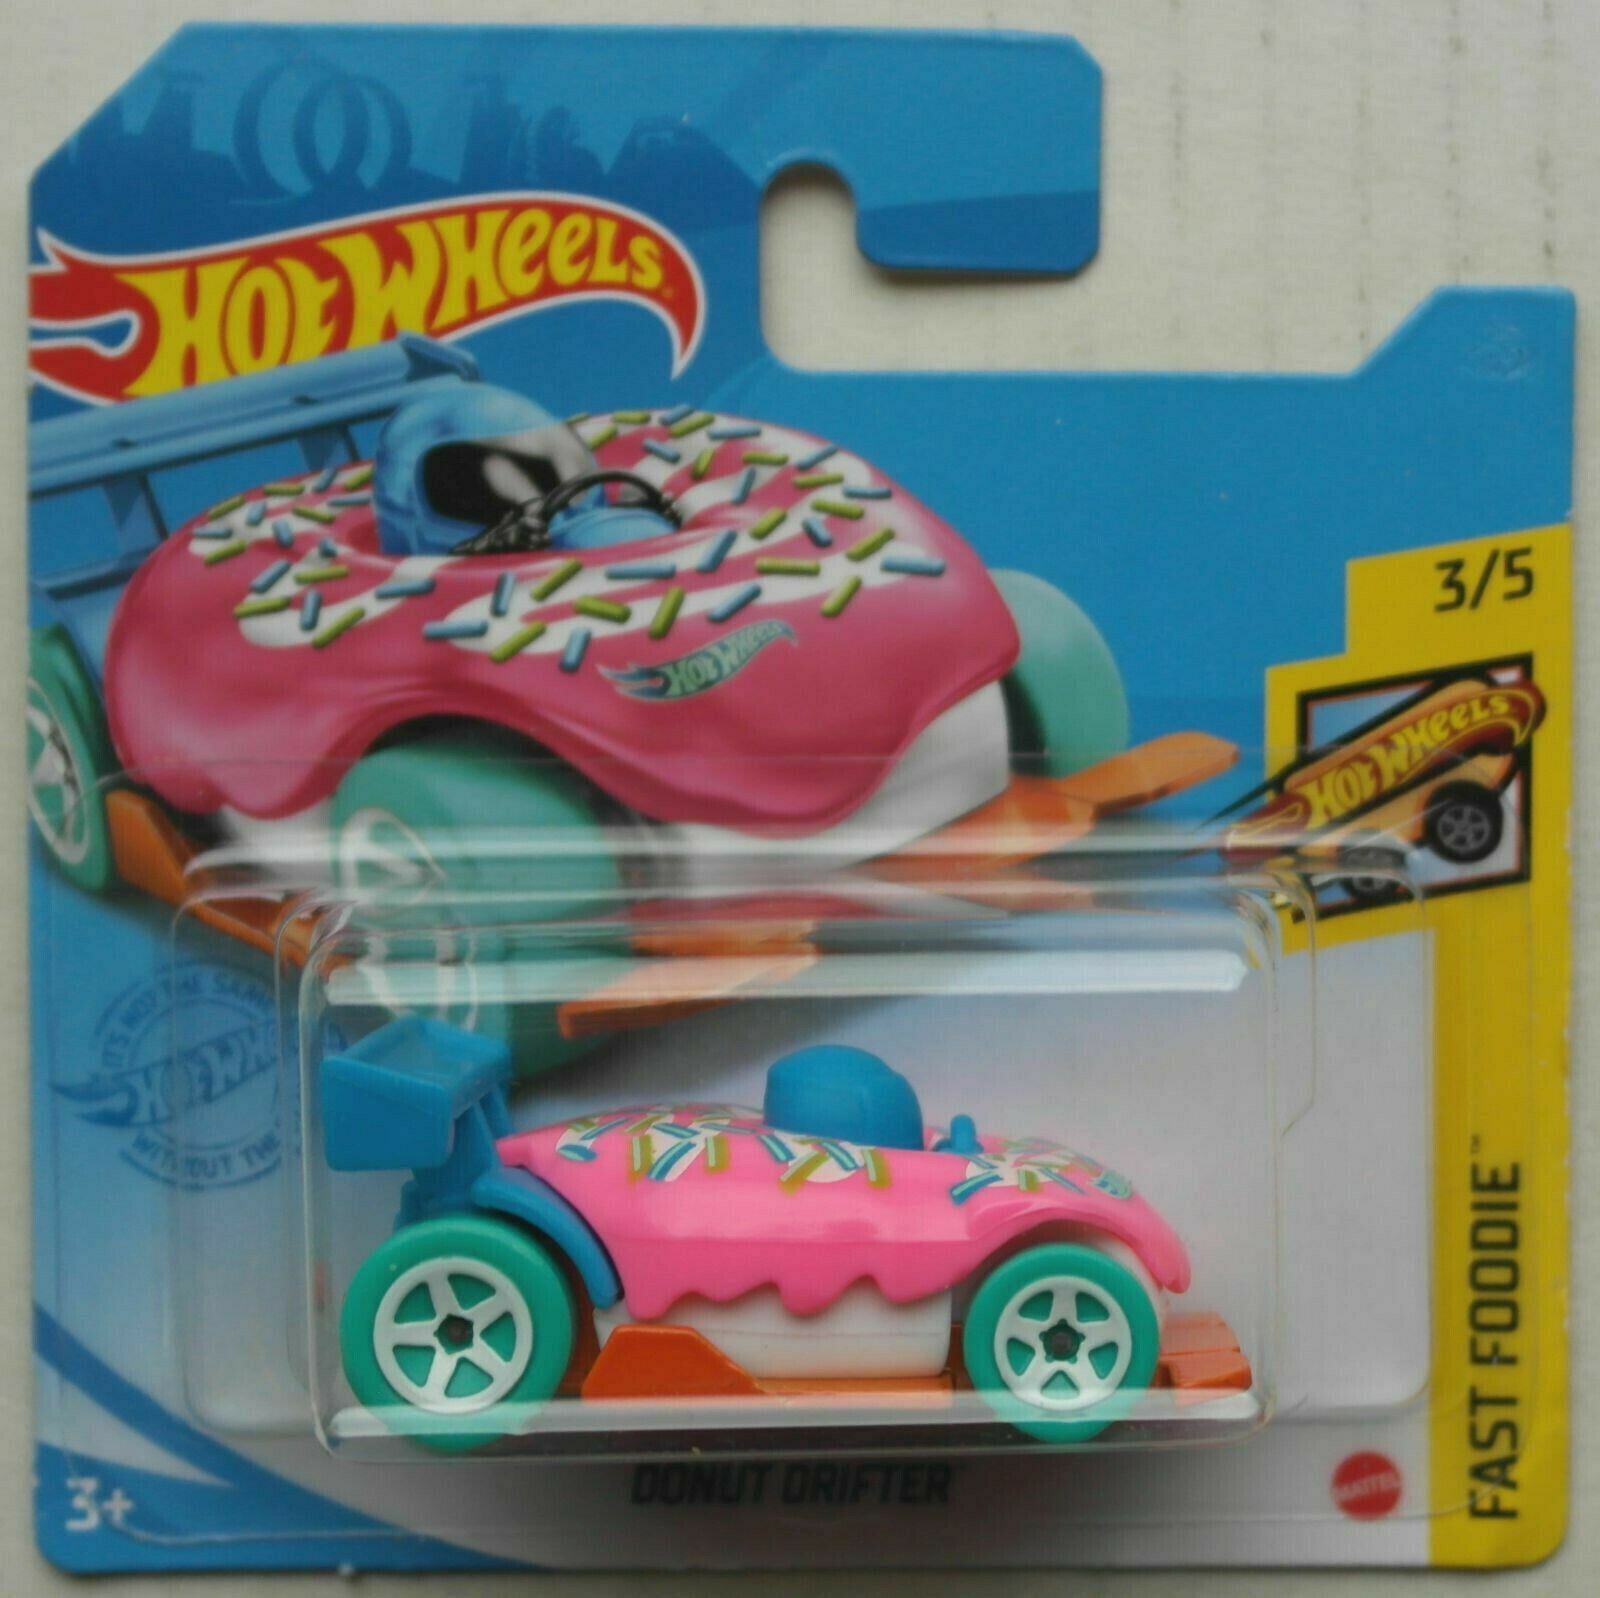 @ Hot Wheels 2021 FAST FOODIE DONUT DRIFTER 3/5 60/250 GRY08